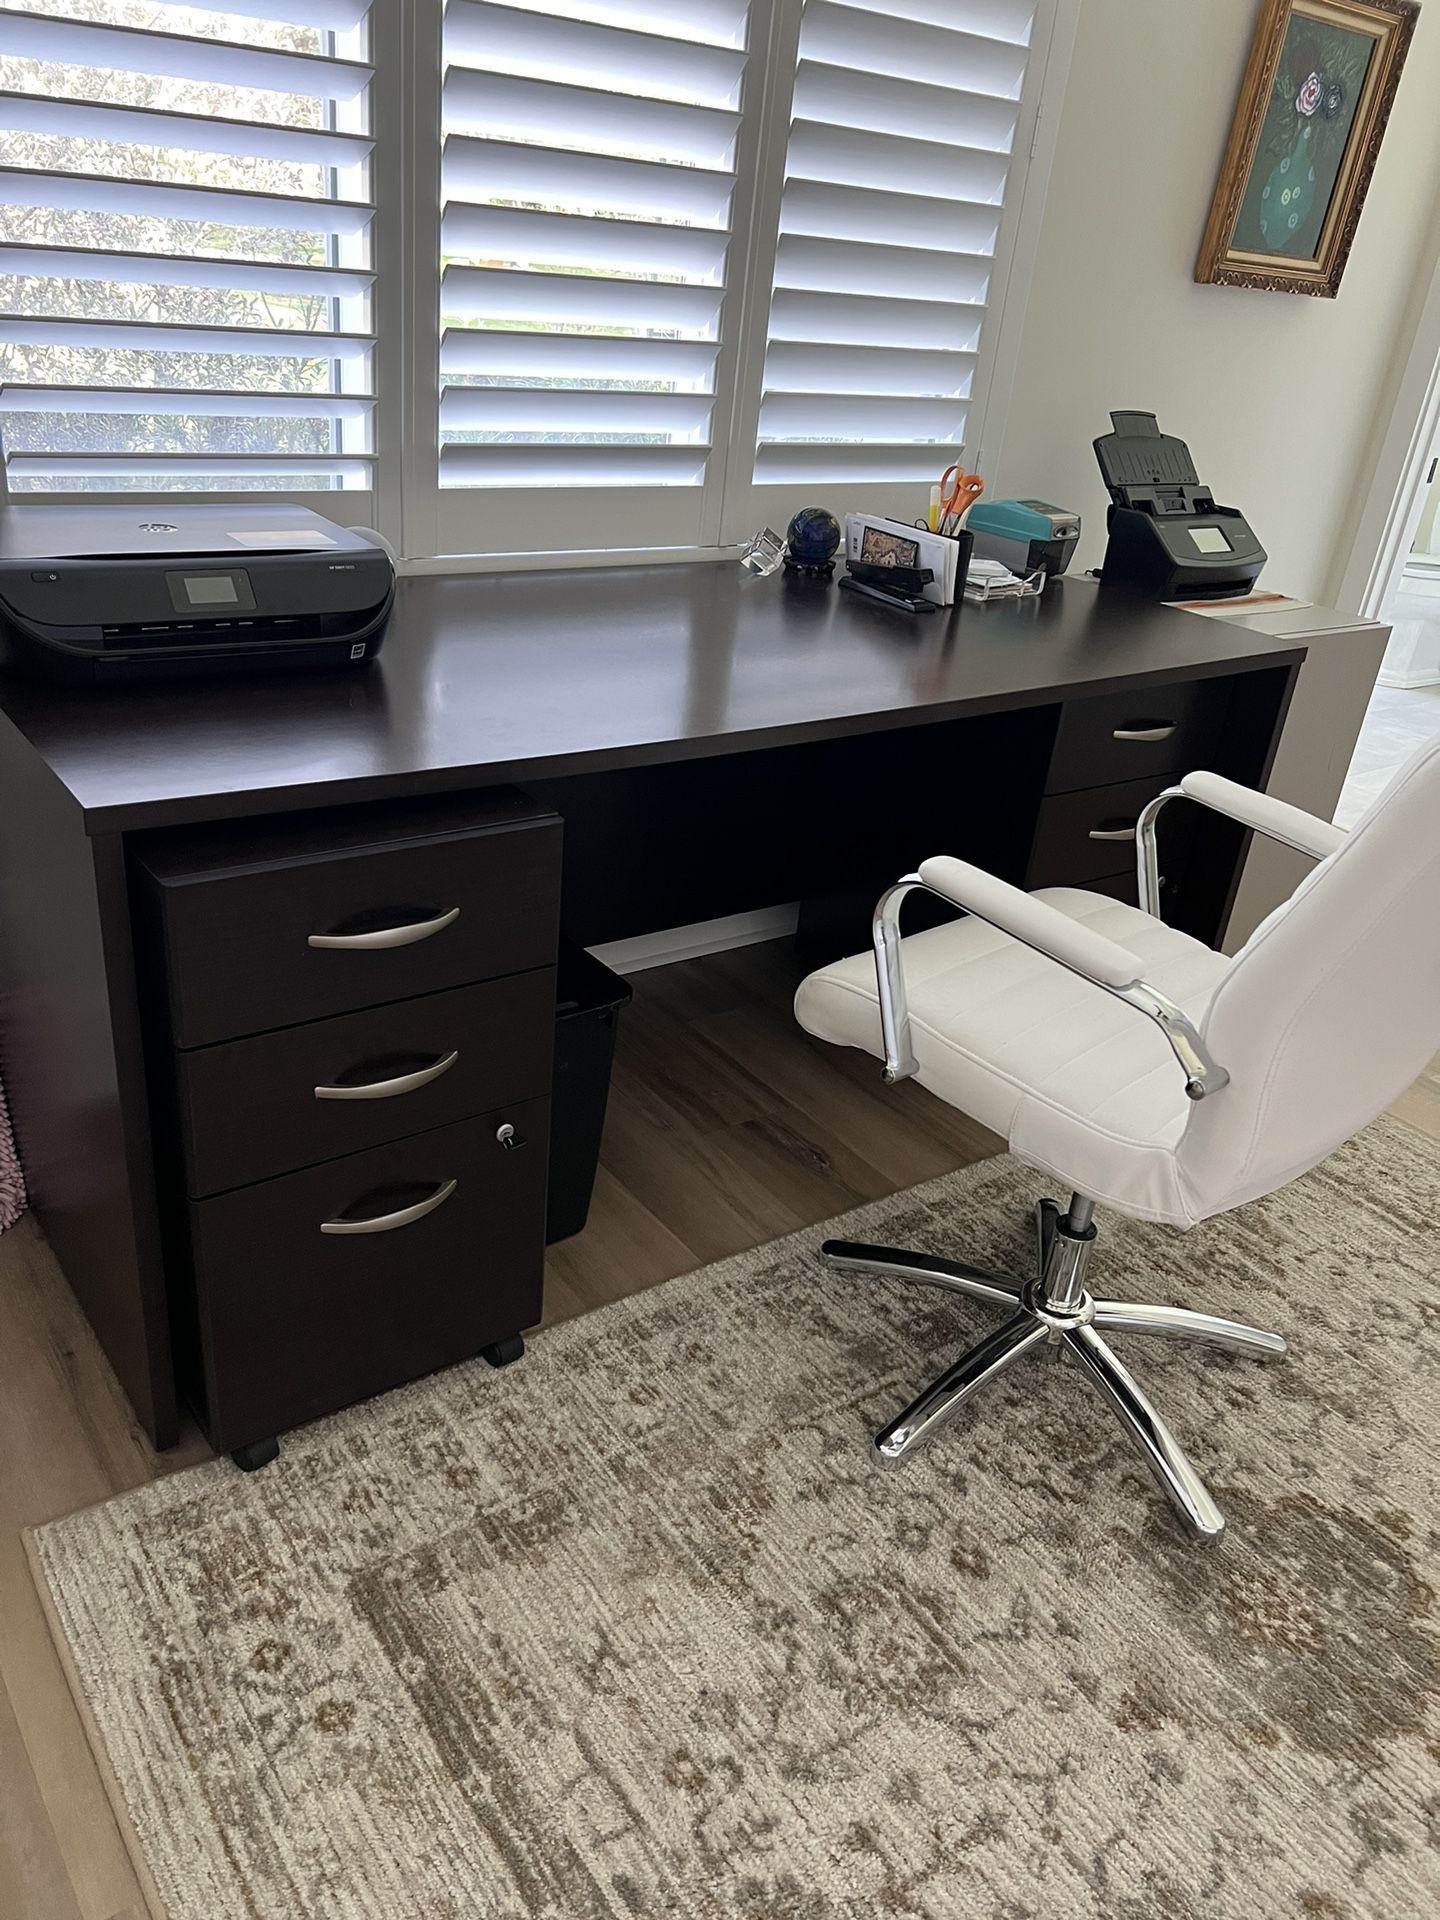 Large Desk with 2 Filing Cabinets!